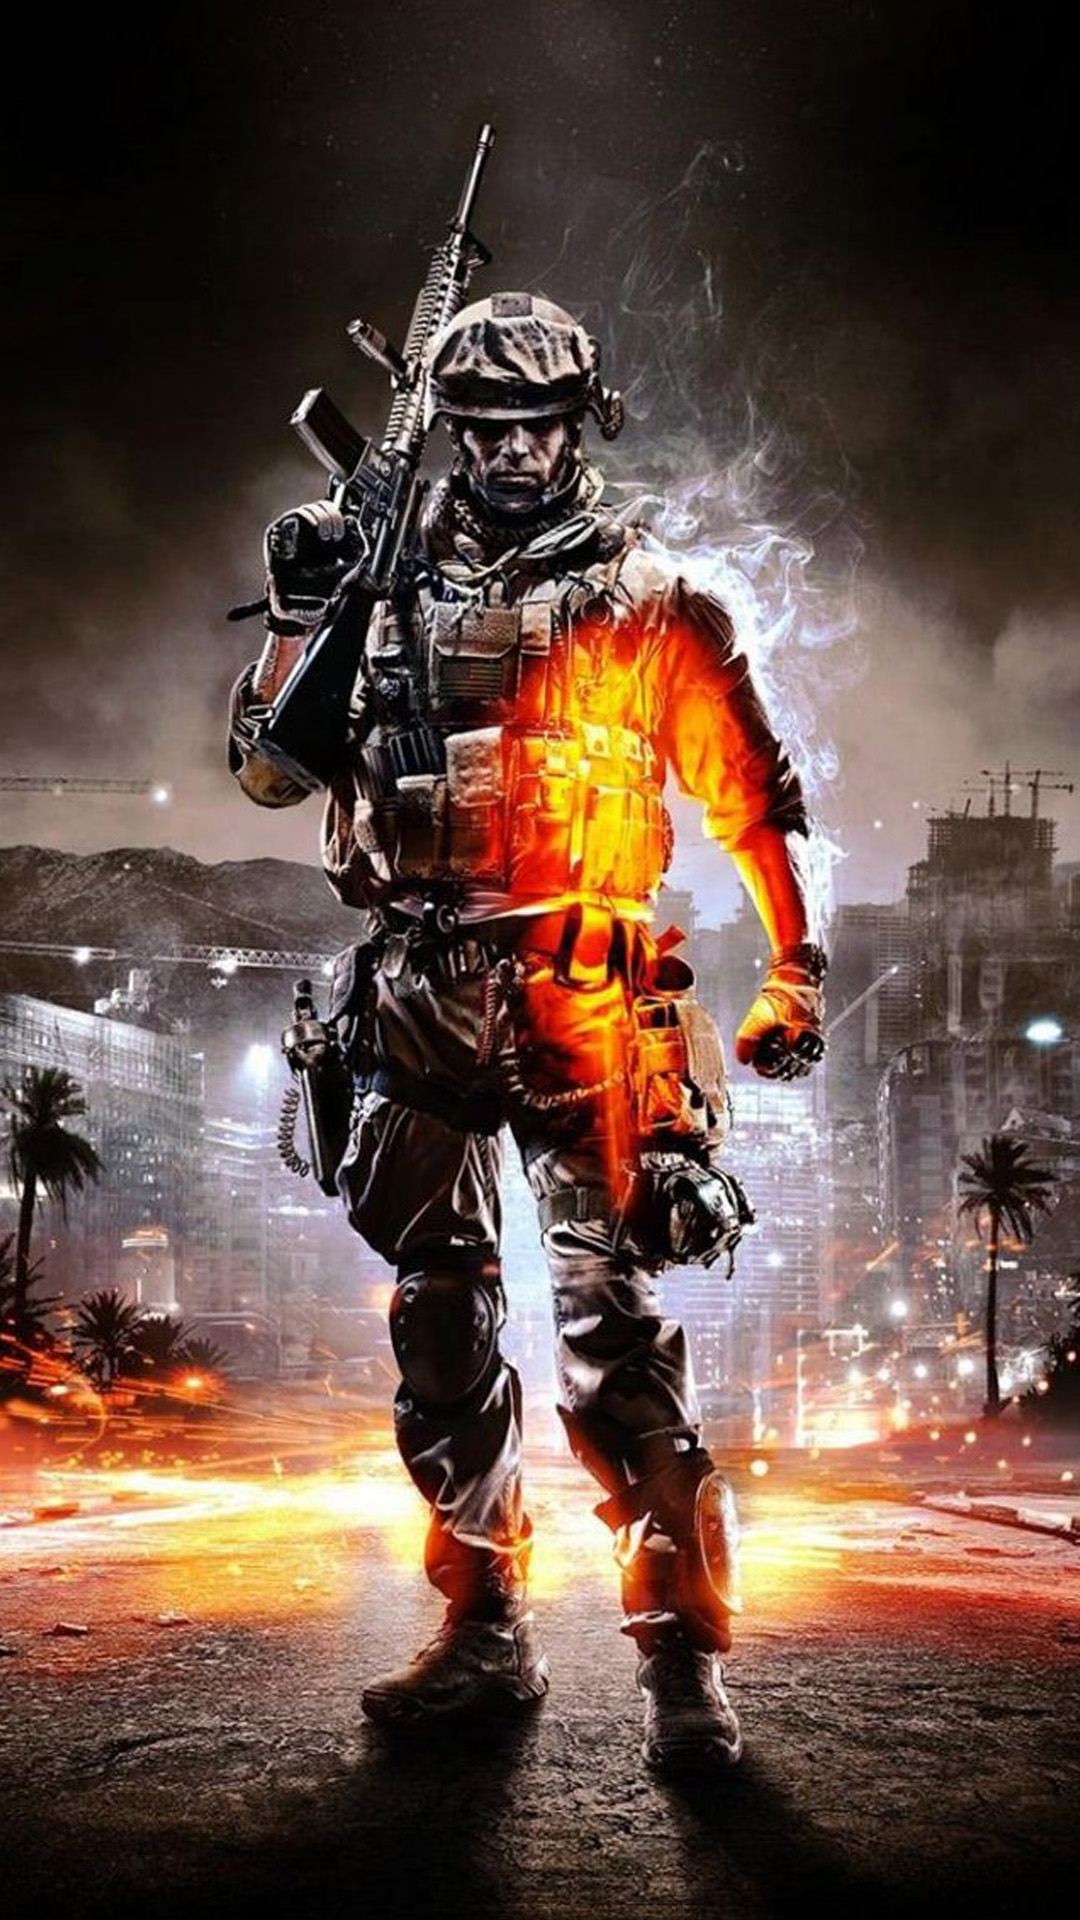 gaming wallpapers for android,action adventure game,movie,pc game,action film,firefighter